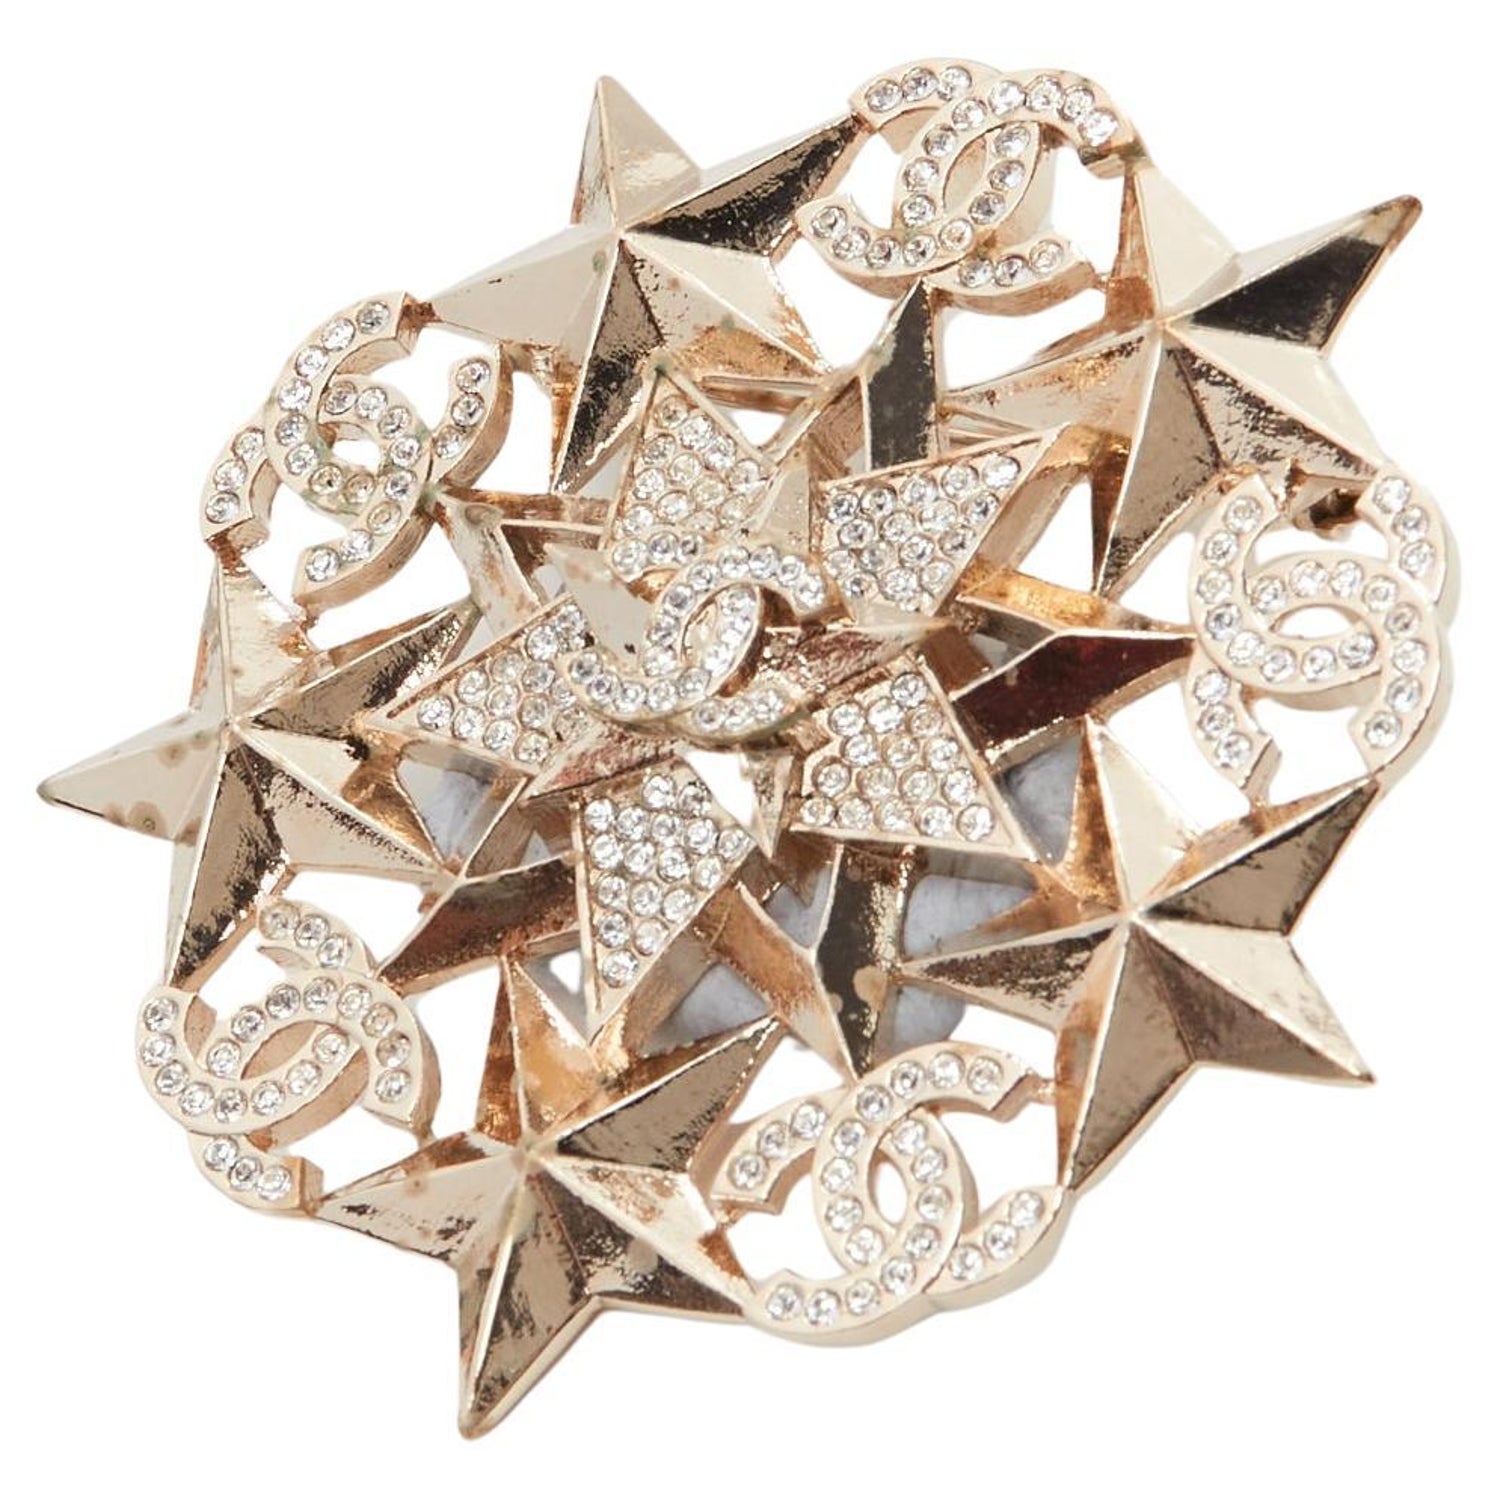 Chanel Cc Brooch 2019 - 5 For Sale on 1stDibs